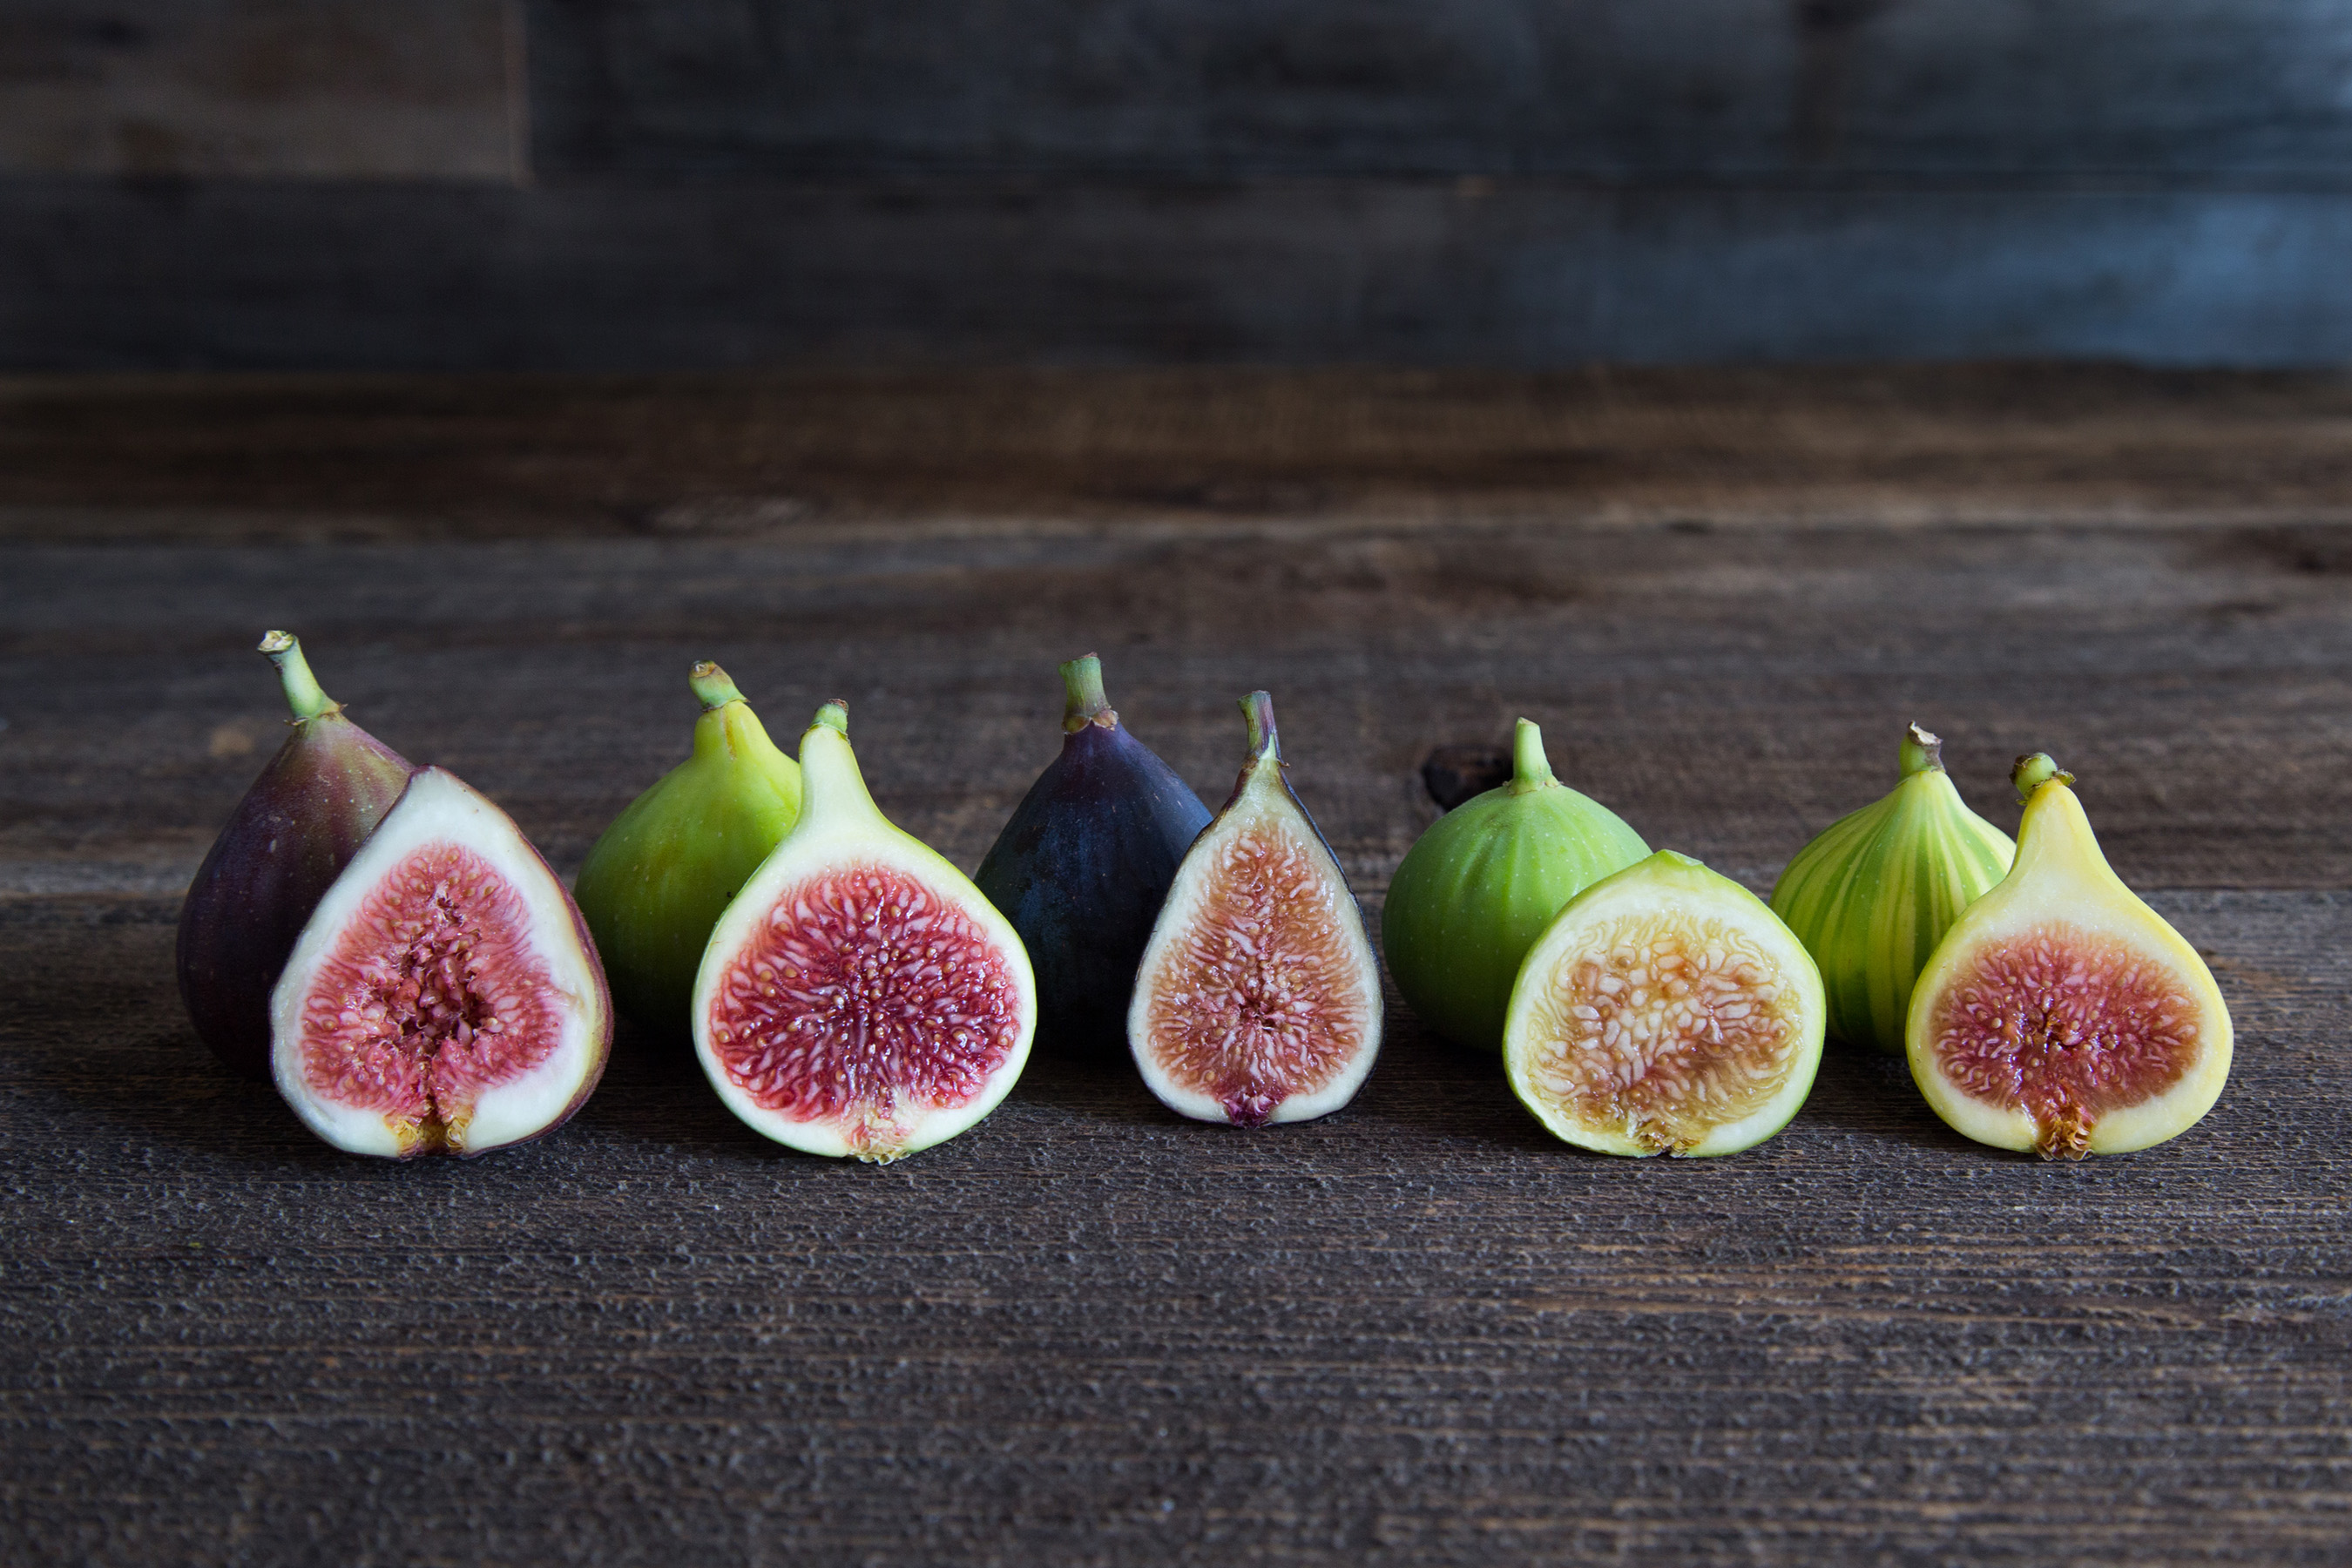 REDISCOVER FIGS: THE ANCIENT FRUIT WITH MODERN APPEAL